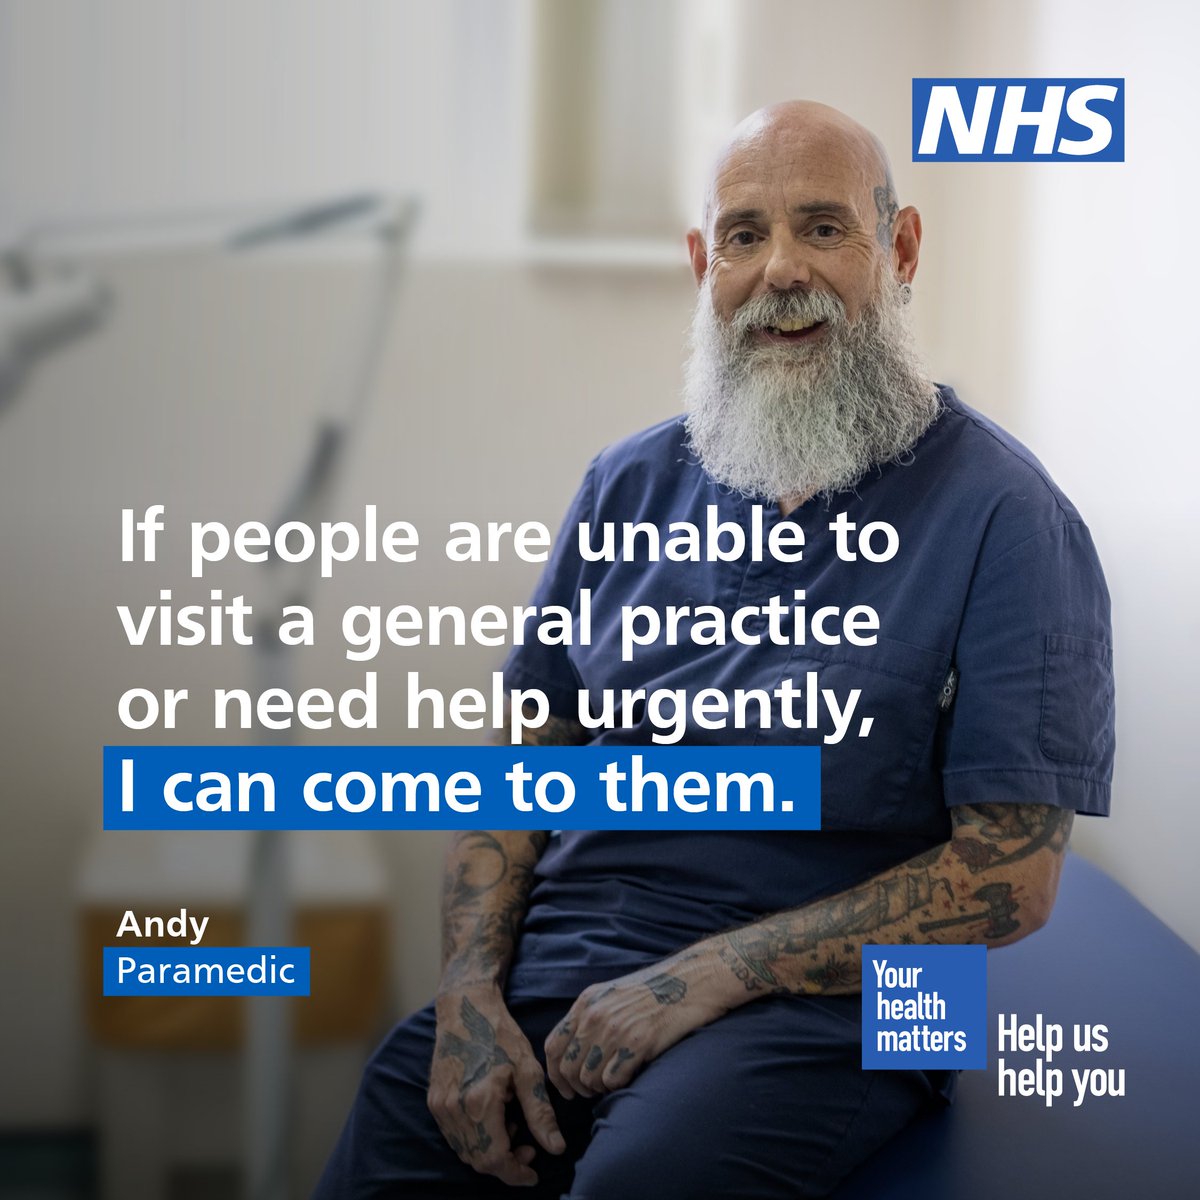 'At many GP surgeries, there is a range of health professionals who can help you. A paramedic may be able to visit you at home if you’re unable to come into your practice. Your general practice team is here to help you. ➡️ orlo.uk/QtQYF'